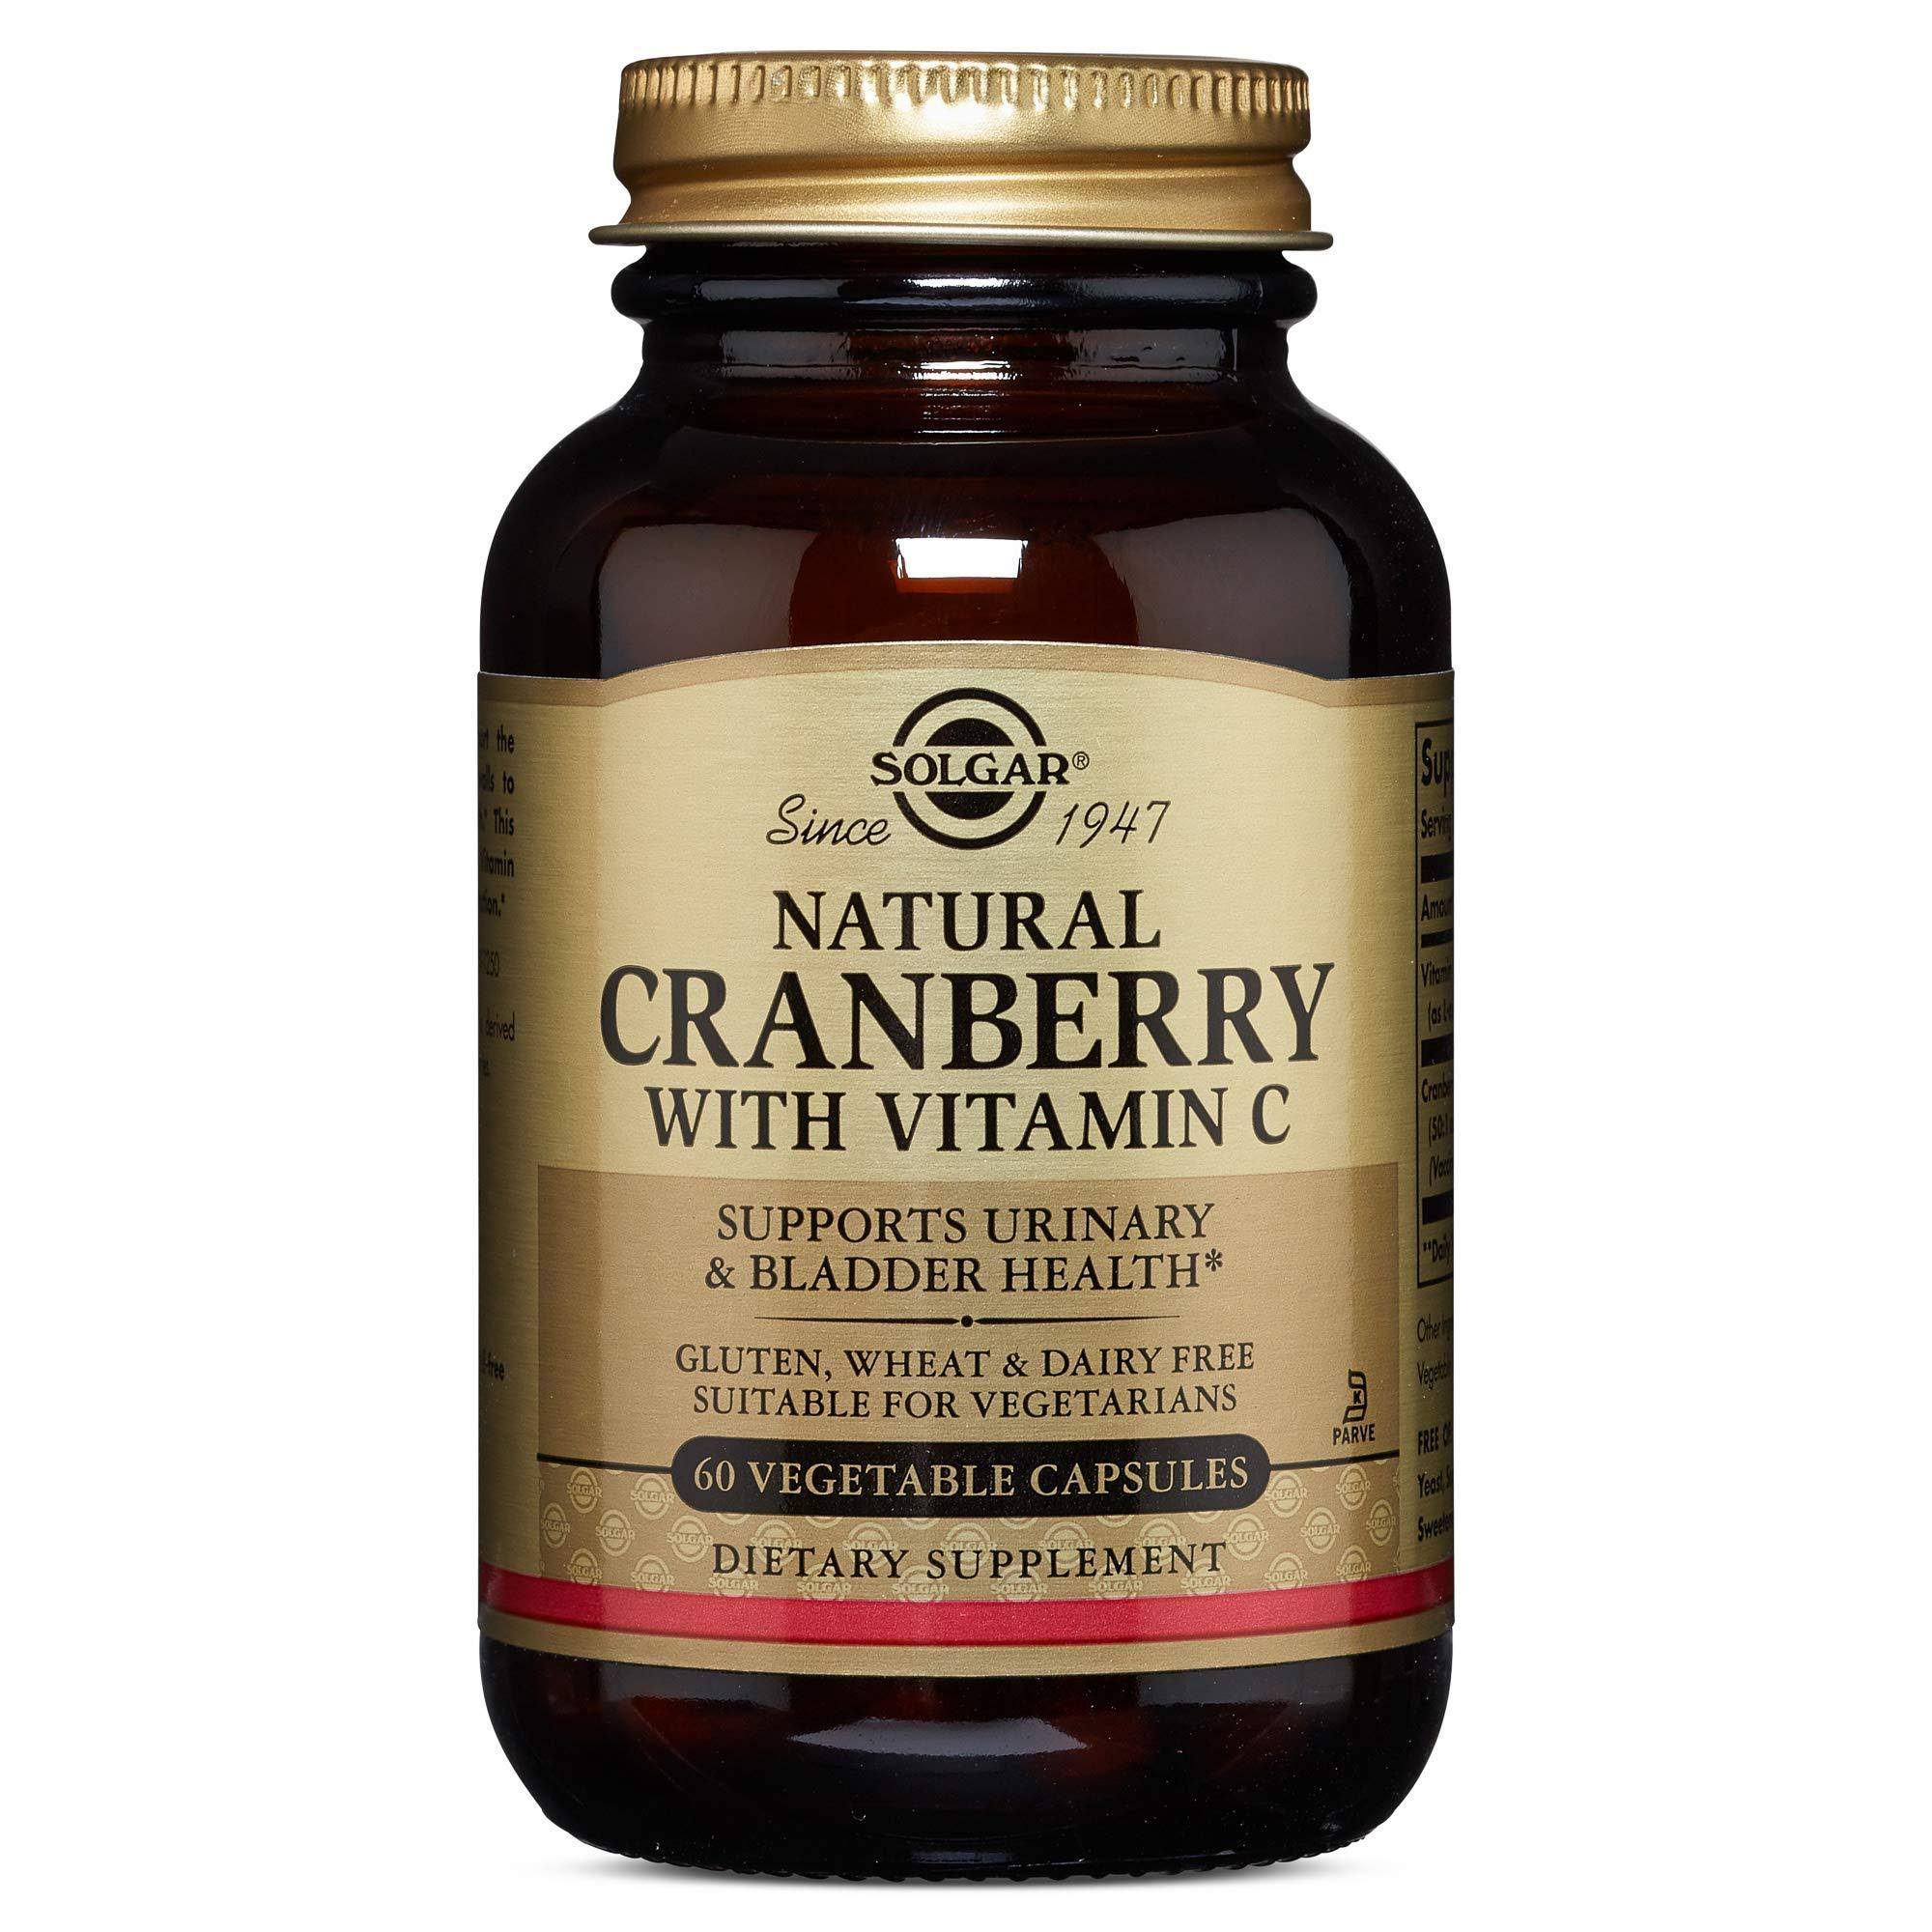 Solgar Cranberry & Vitamin-C Urinary Tract Support - 60 Capsules